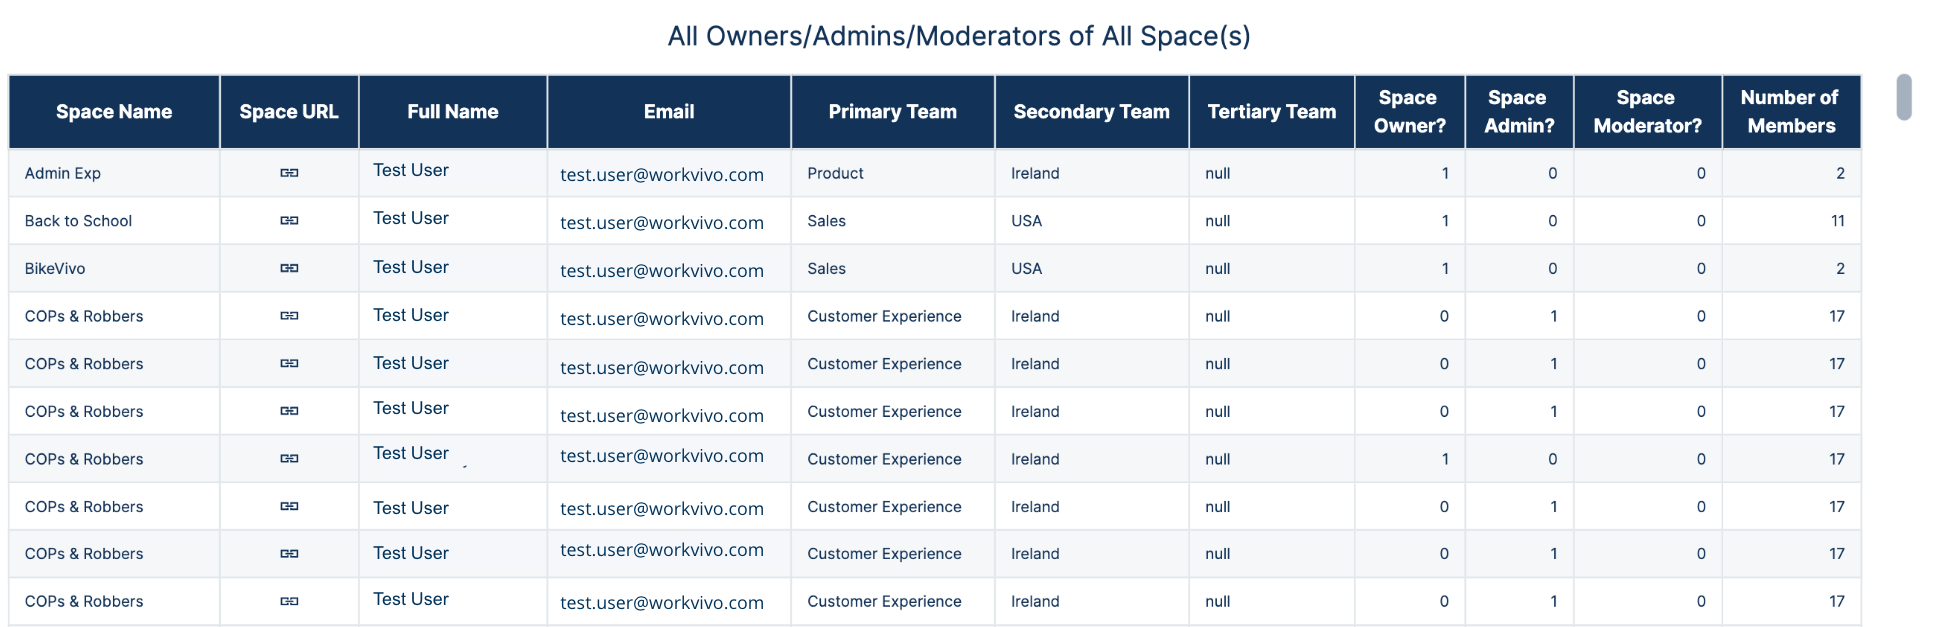 G-All_owners_admins_moderators_table__2_.png